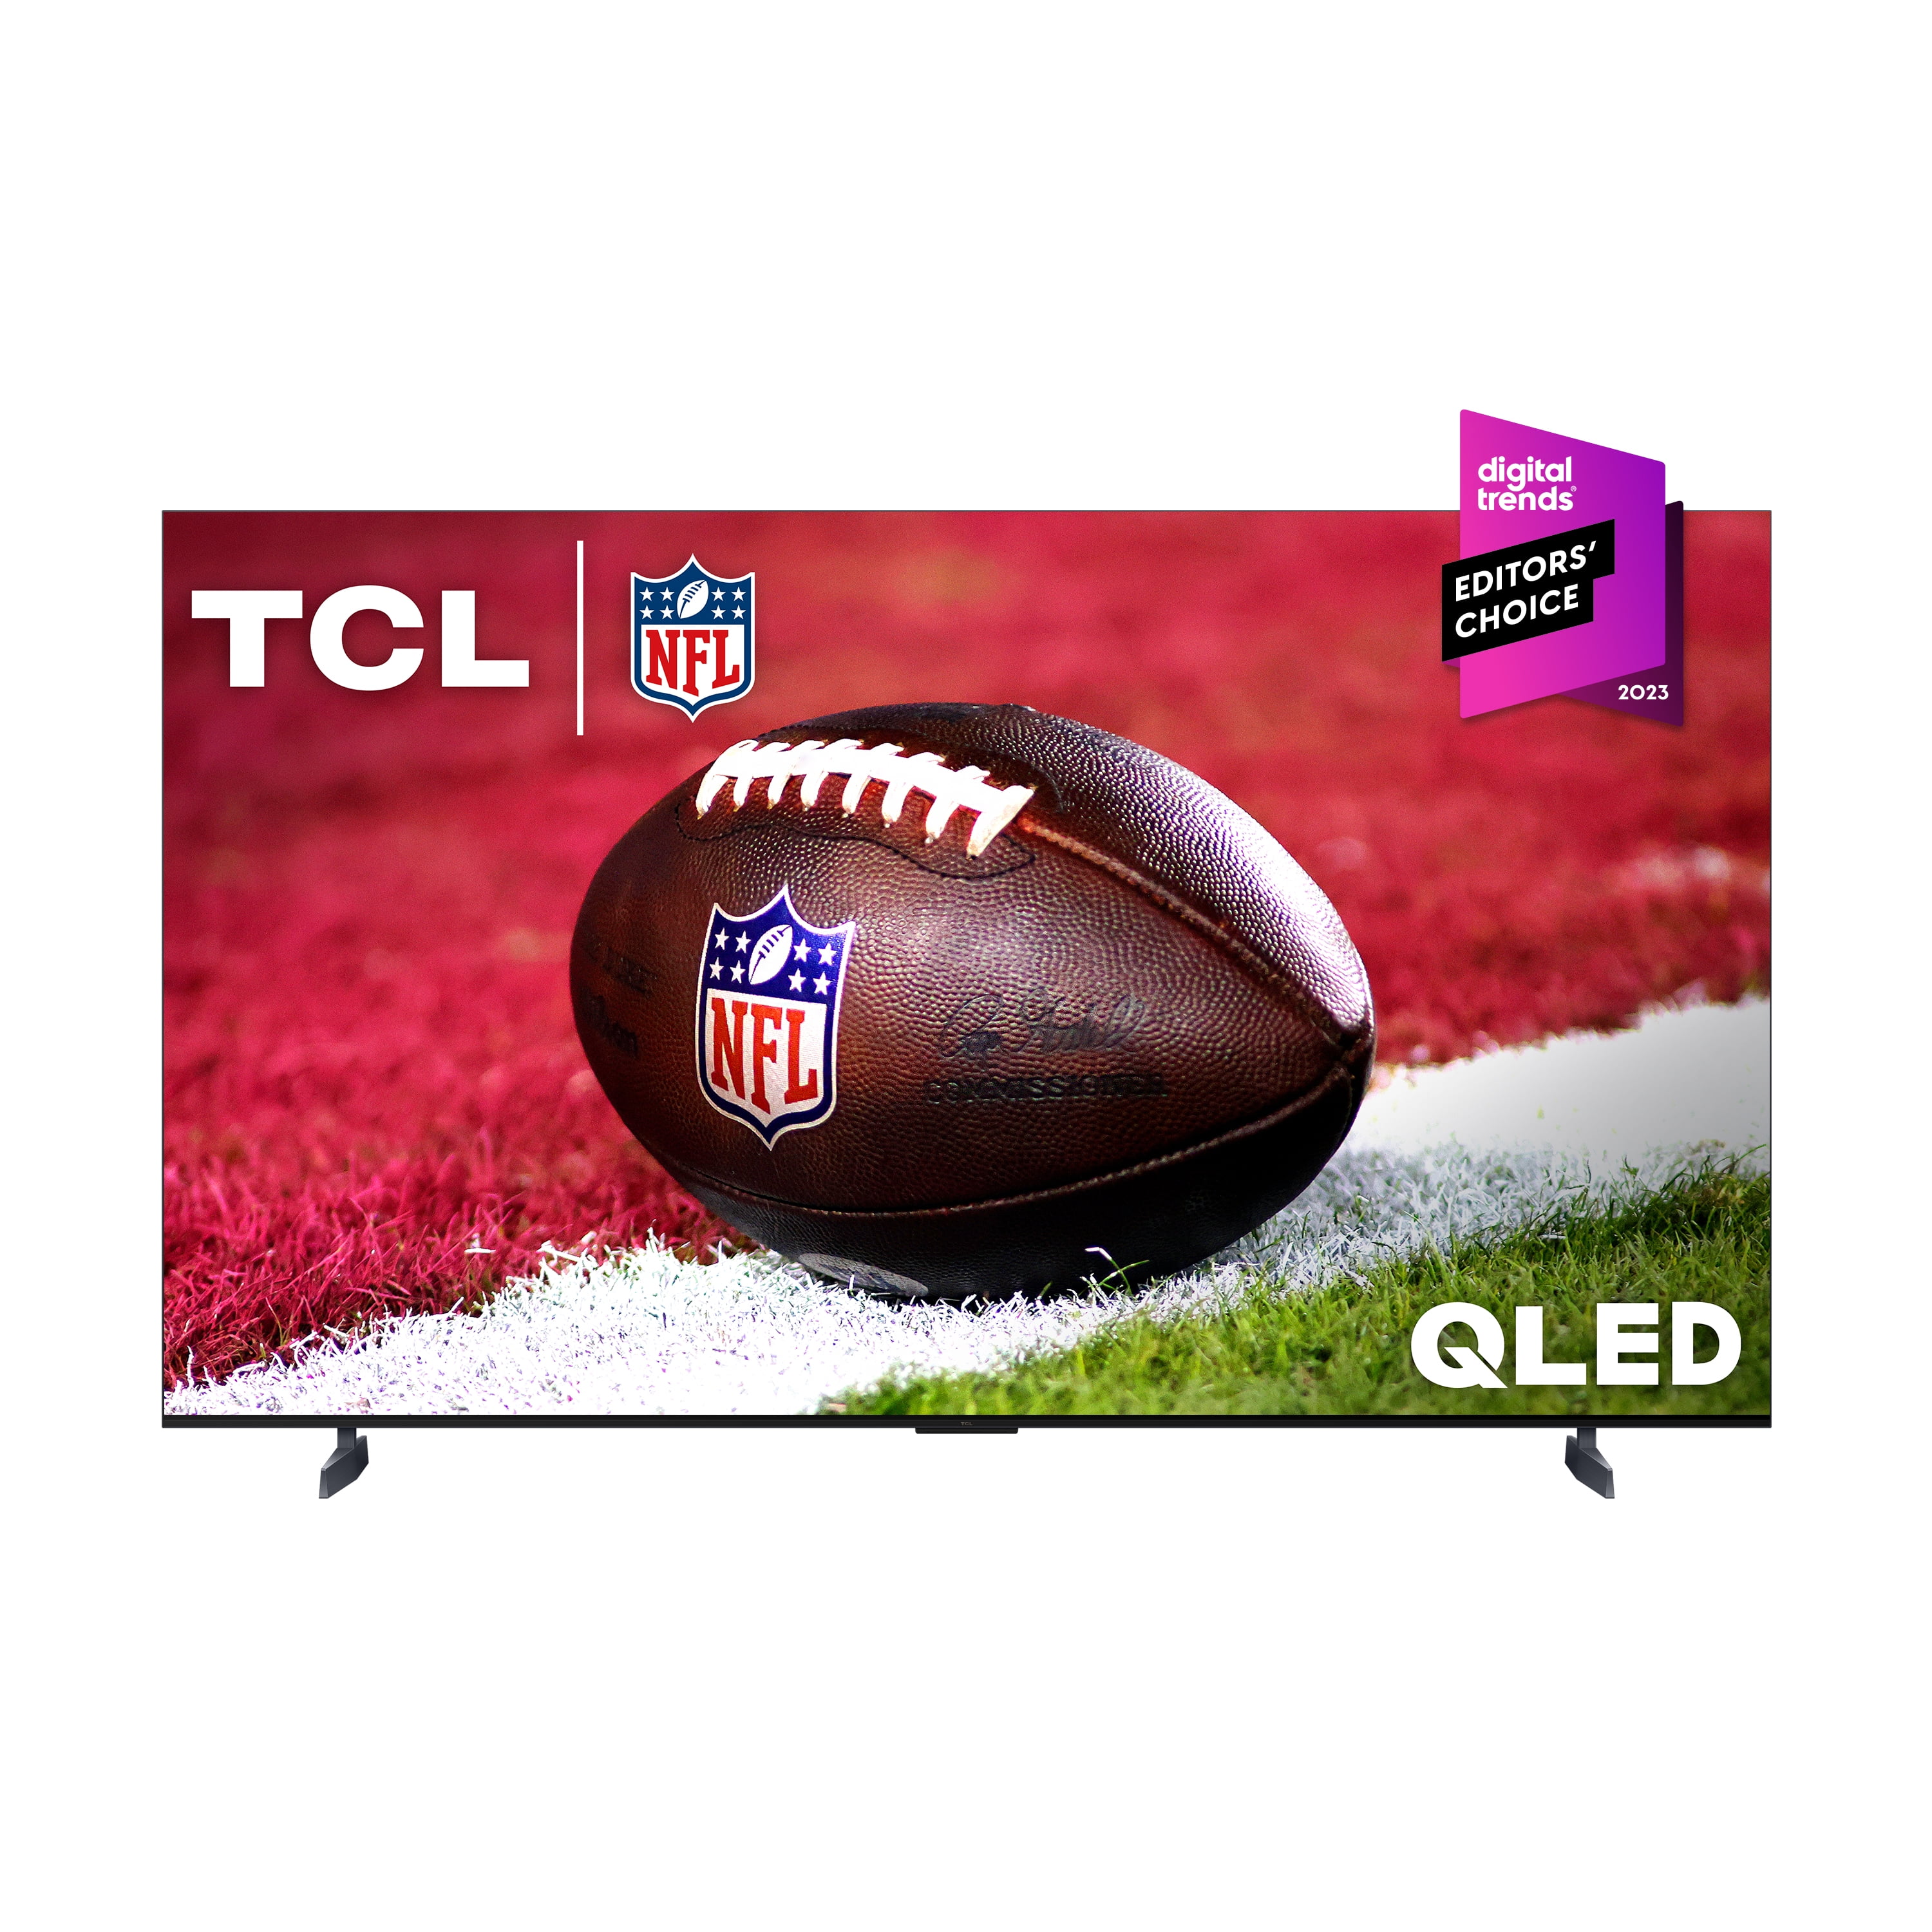 TCL QM8 Mini-LED Review - Where Cost Meets Class